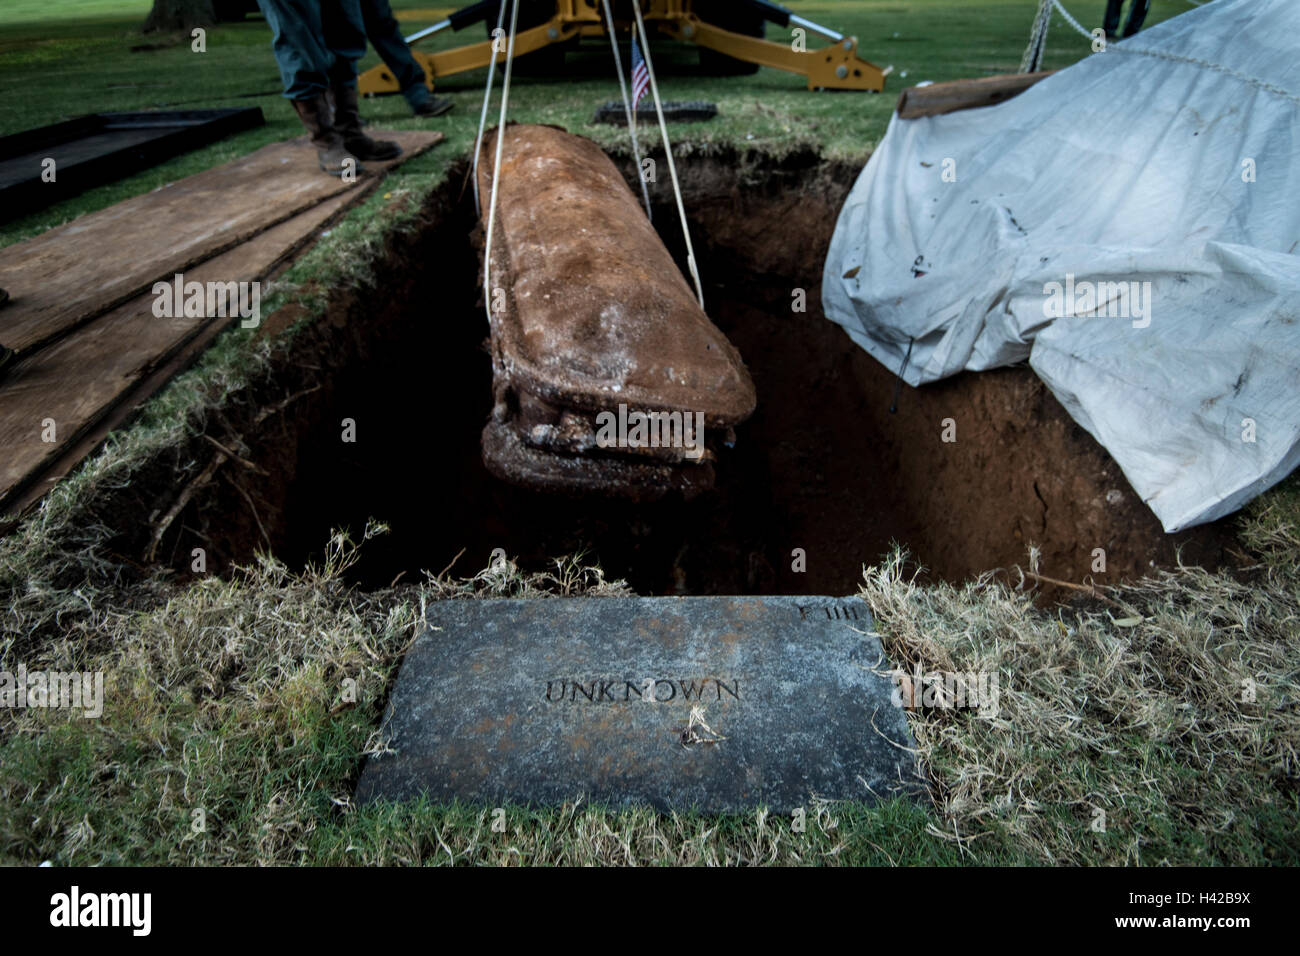 A casket carrying the unidentified remains of a U.S. soldier is lifted from its grave at the National Memorial Cemetery of the Pacific October 3, 2016 in Honolulu, Hawaii. The DPAA are transporting the remains to a lab for DNA analysis with the hope of identifying the remains. Stock Photo